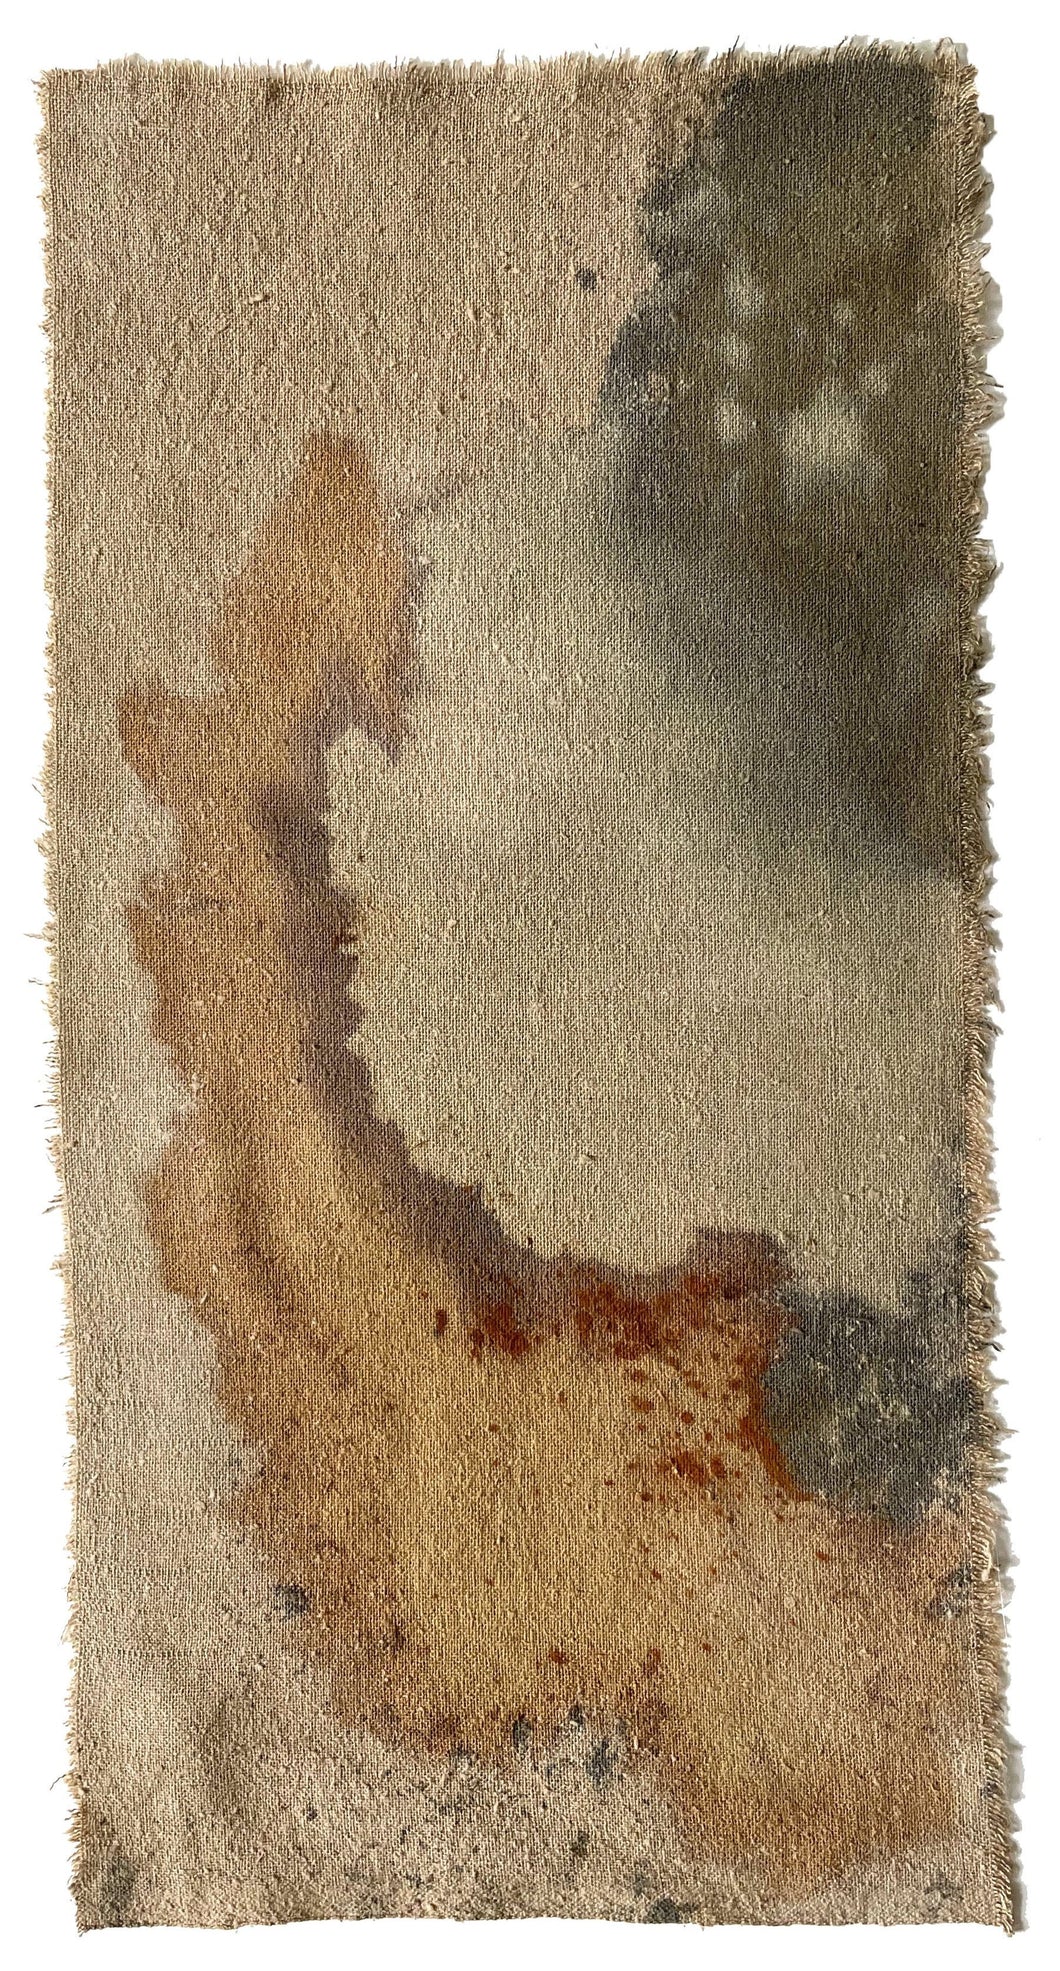 marsh - naturally dyed textile